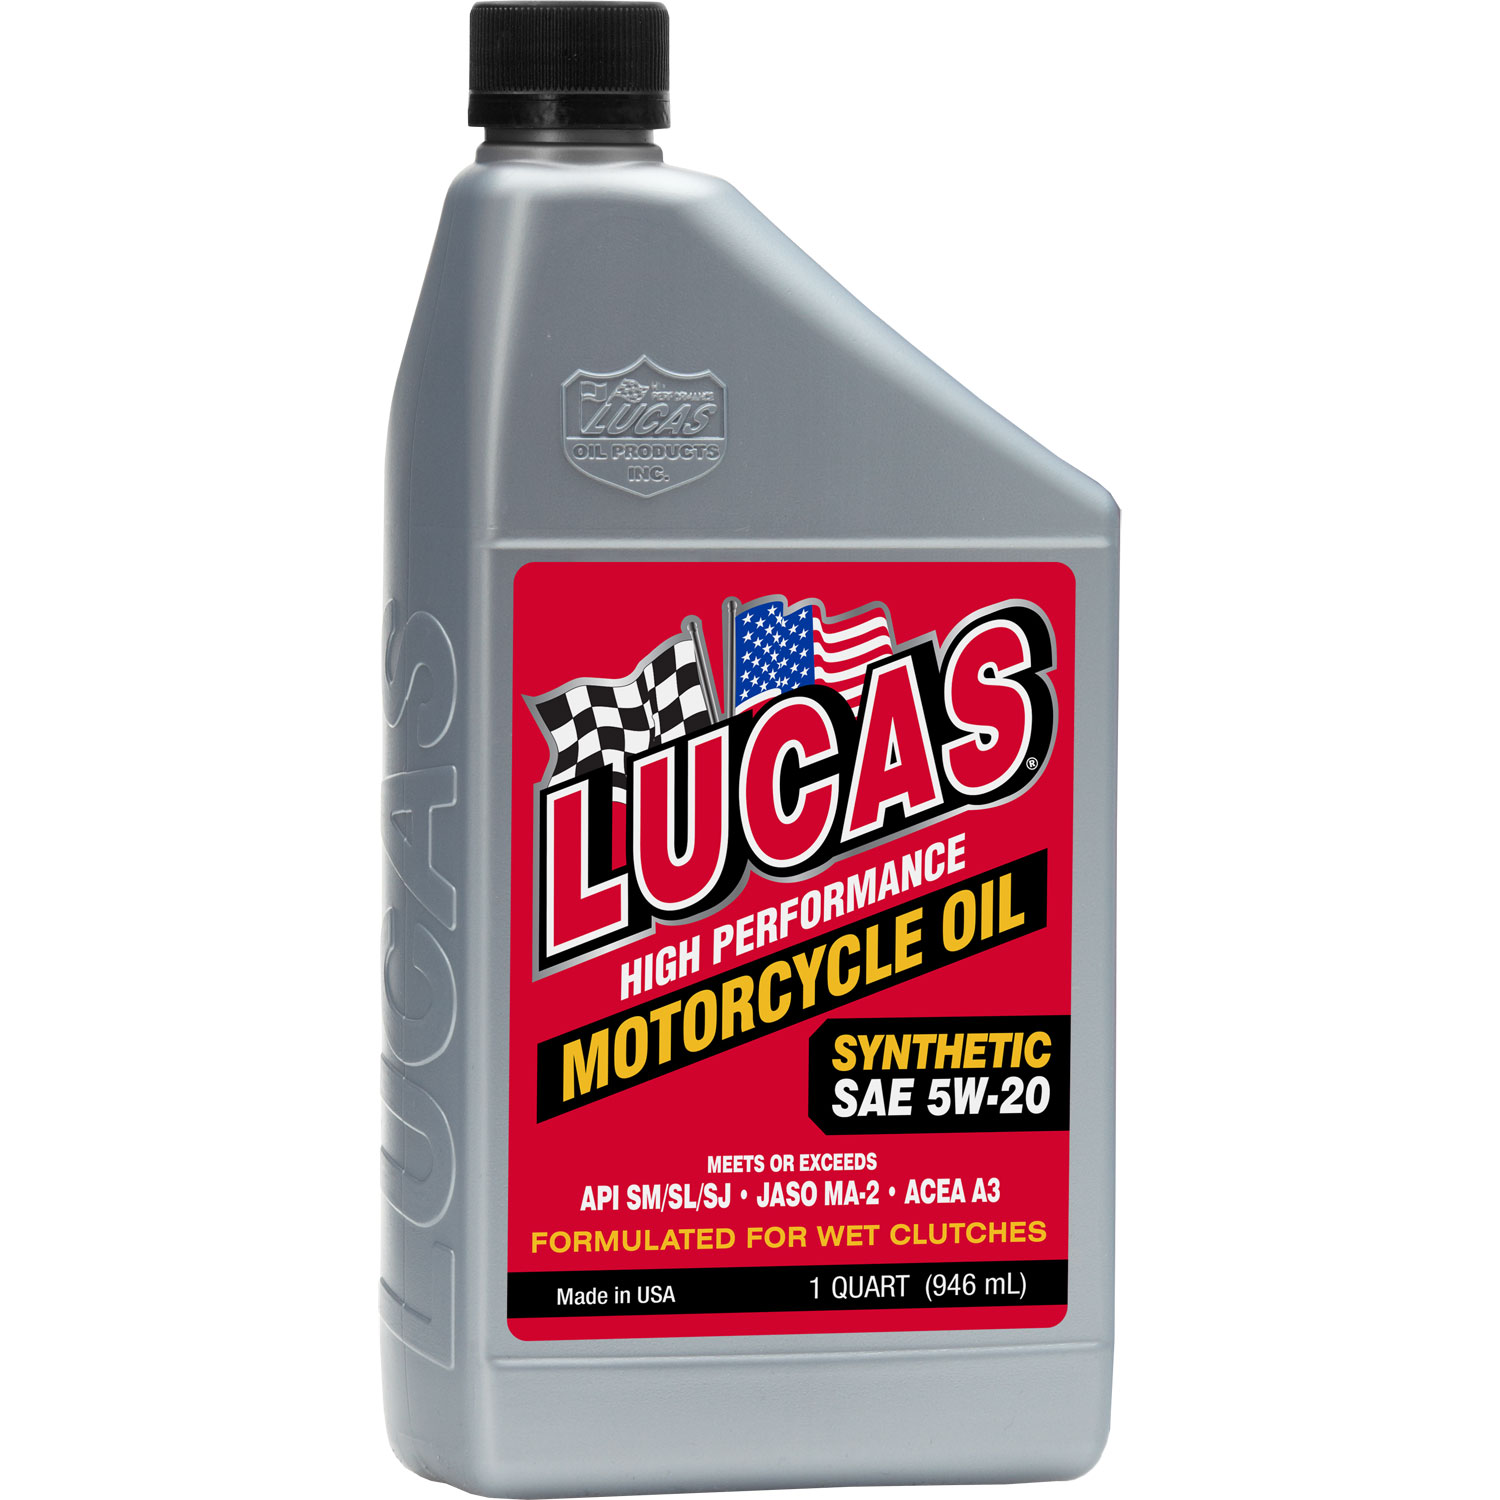 Synthetic SAE 5W-20 Motorcycle Oil Quart